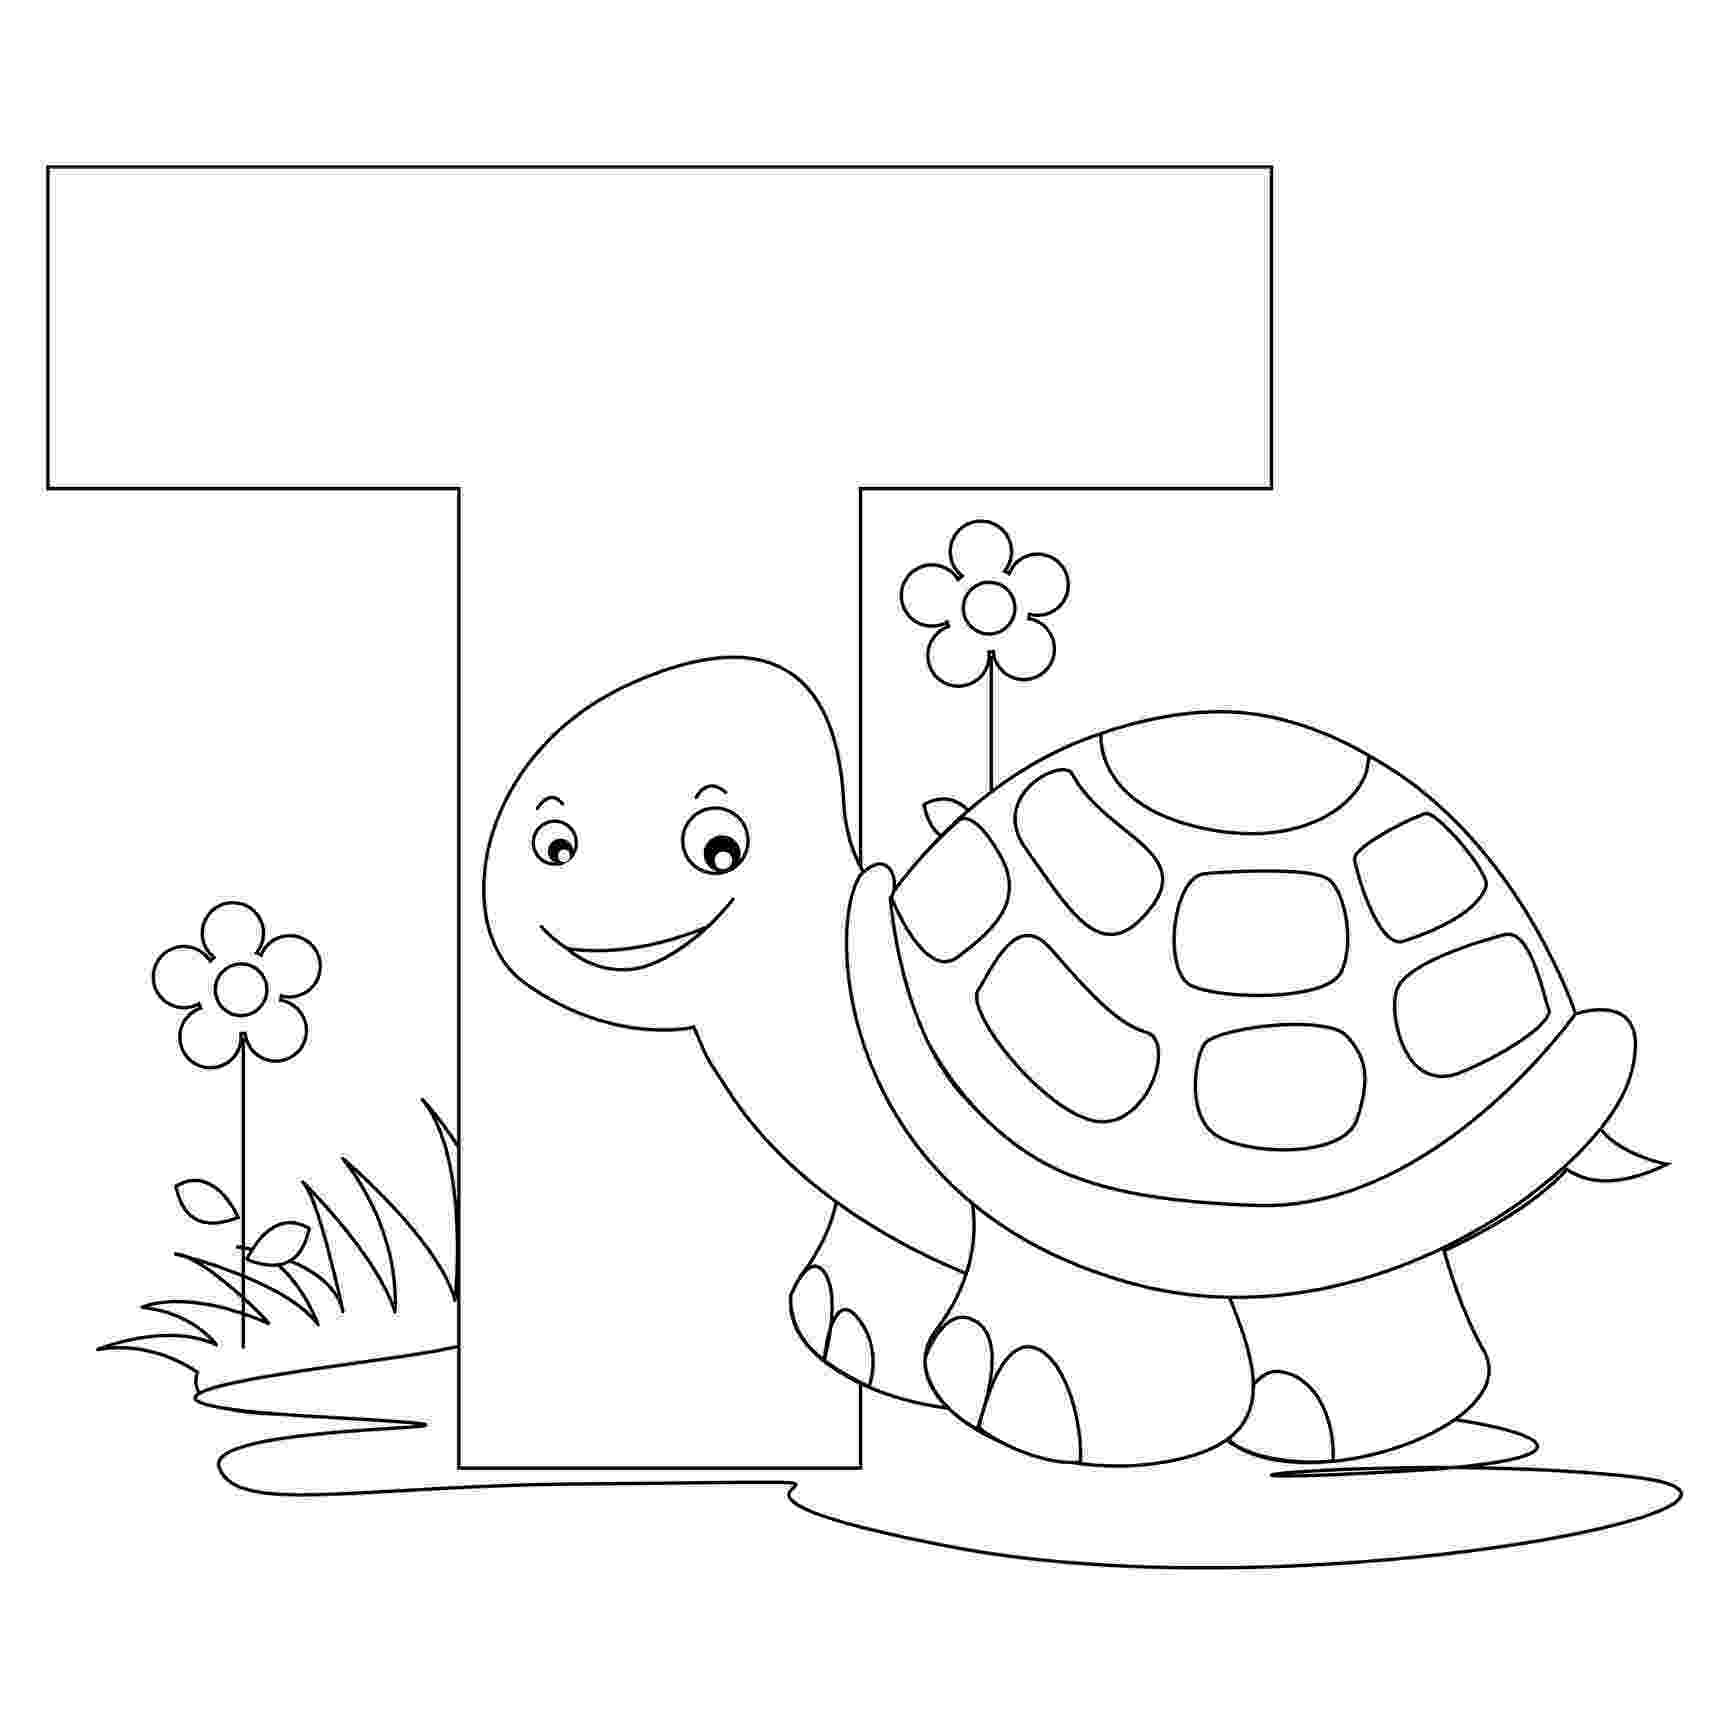 alphabet n coloring pages letter n coloring pages getcoloringpagescom pages coloring alphabet n 